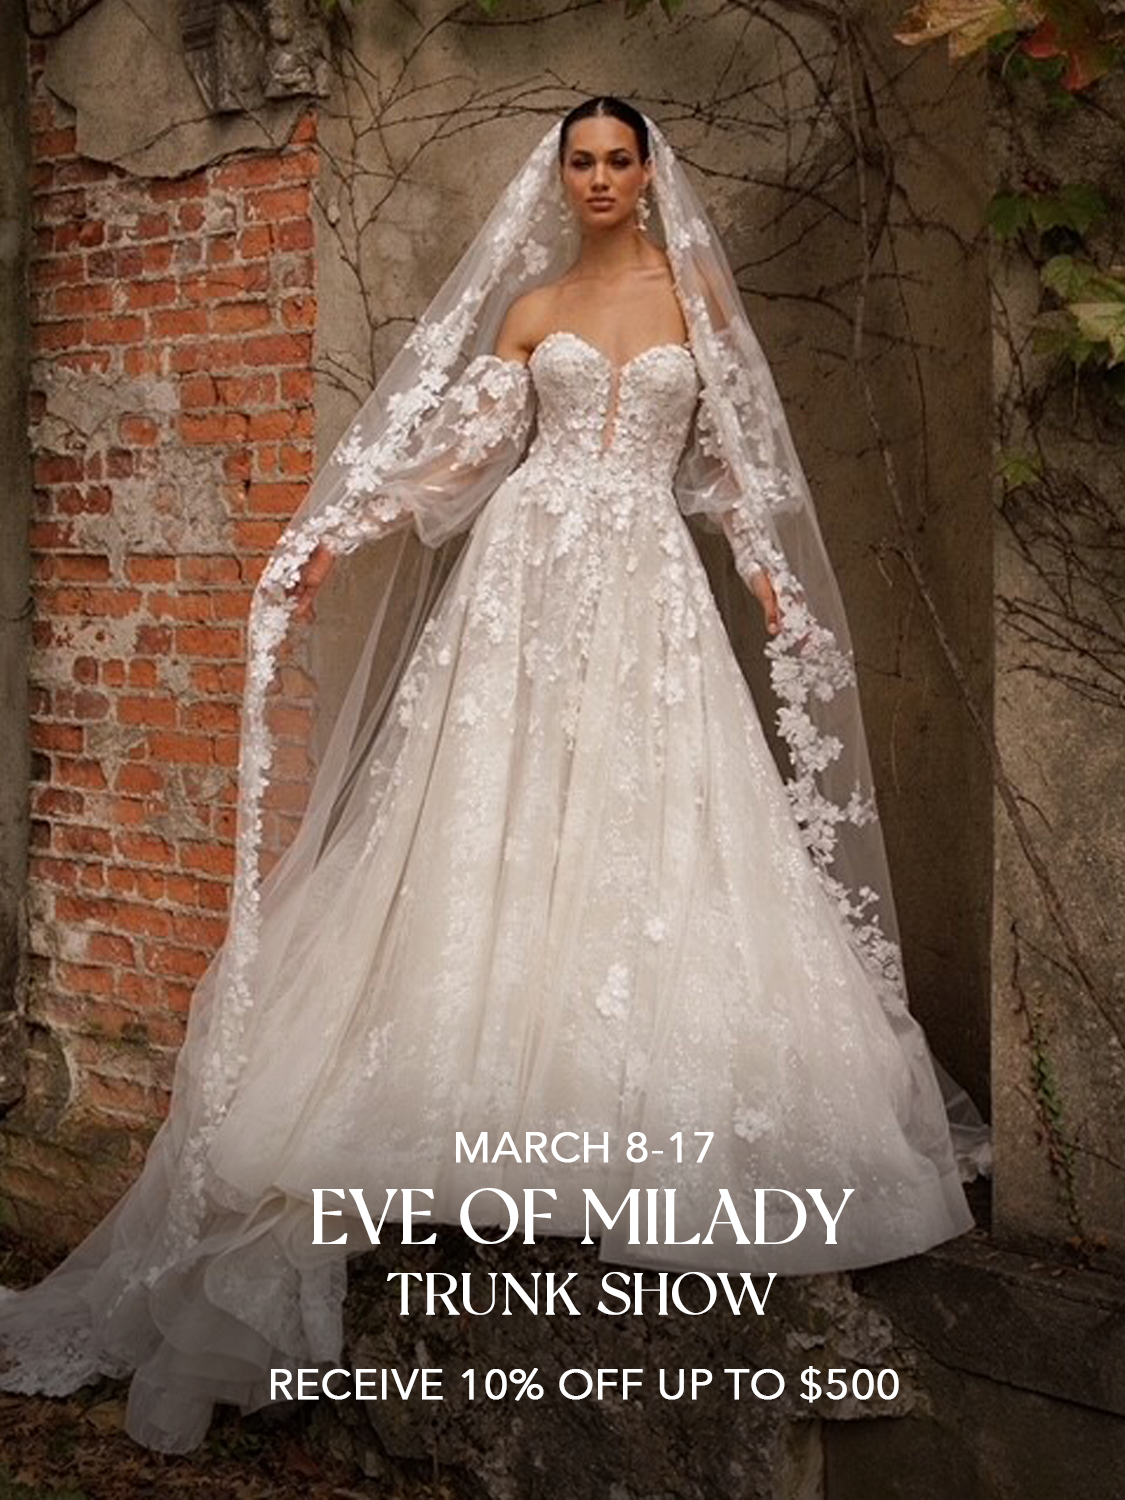 Eve of Milady Trunk Show - March 8-17